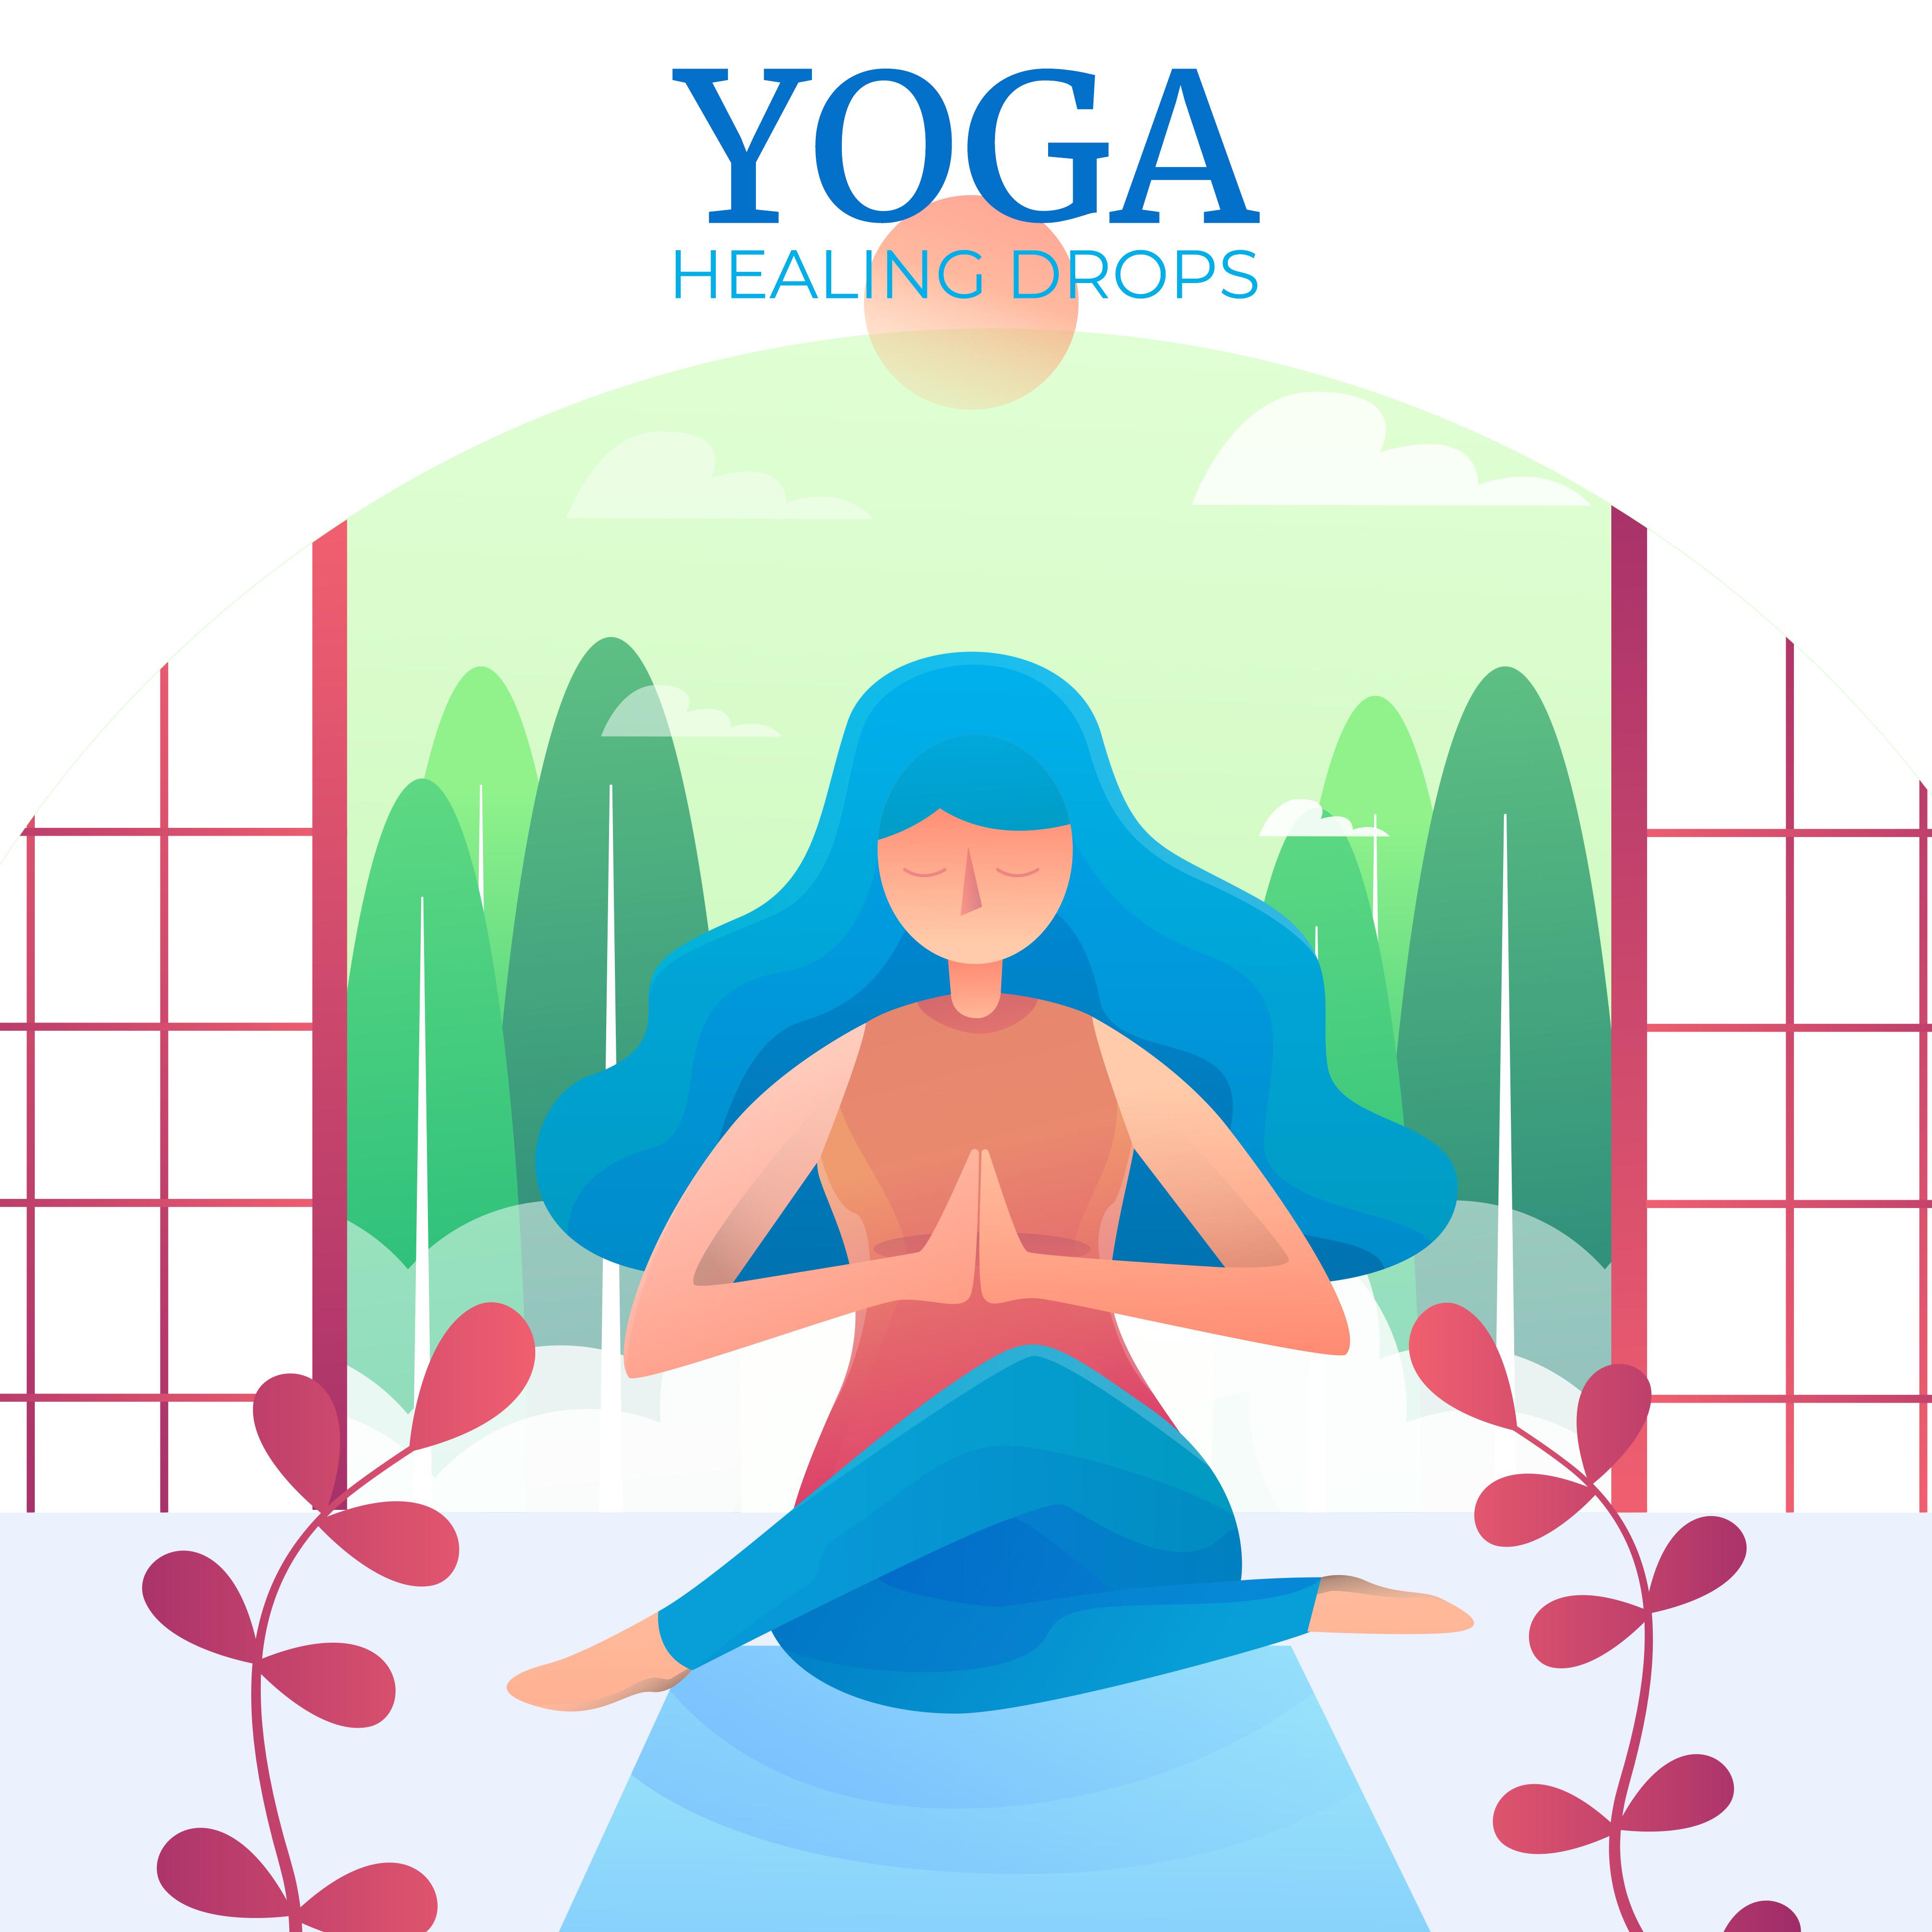 Yoga Healing Drops: Compilation of Fresh 2019 New Age Music Perfect for Meditation & Relaxation, Deep Ambient & Nature Sounds, Body & Soul Healing Songs, Vital Energy Increase